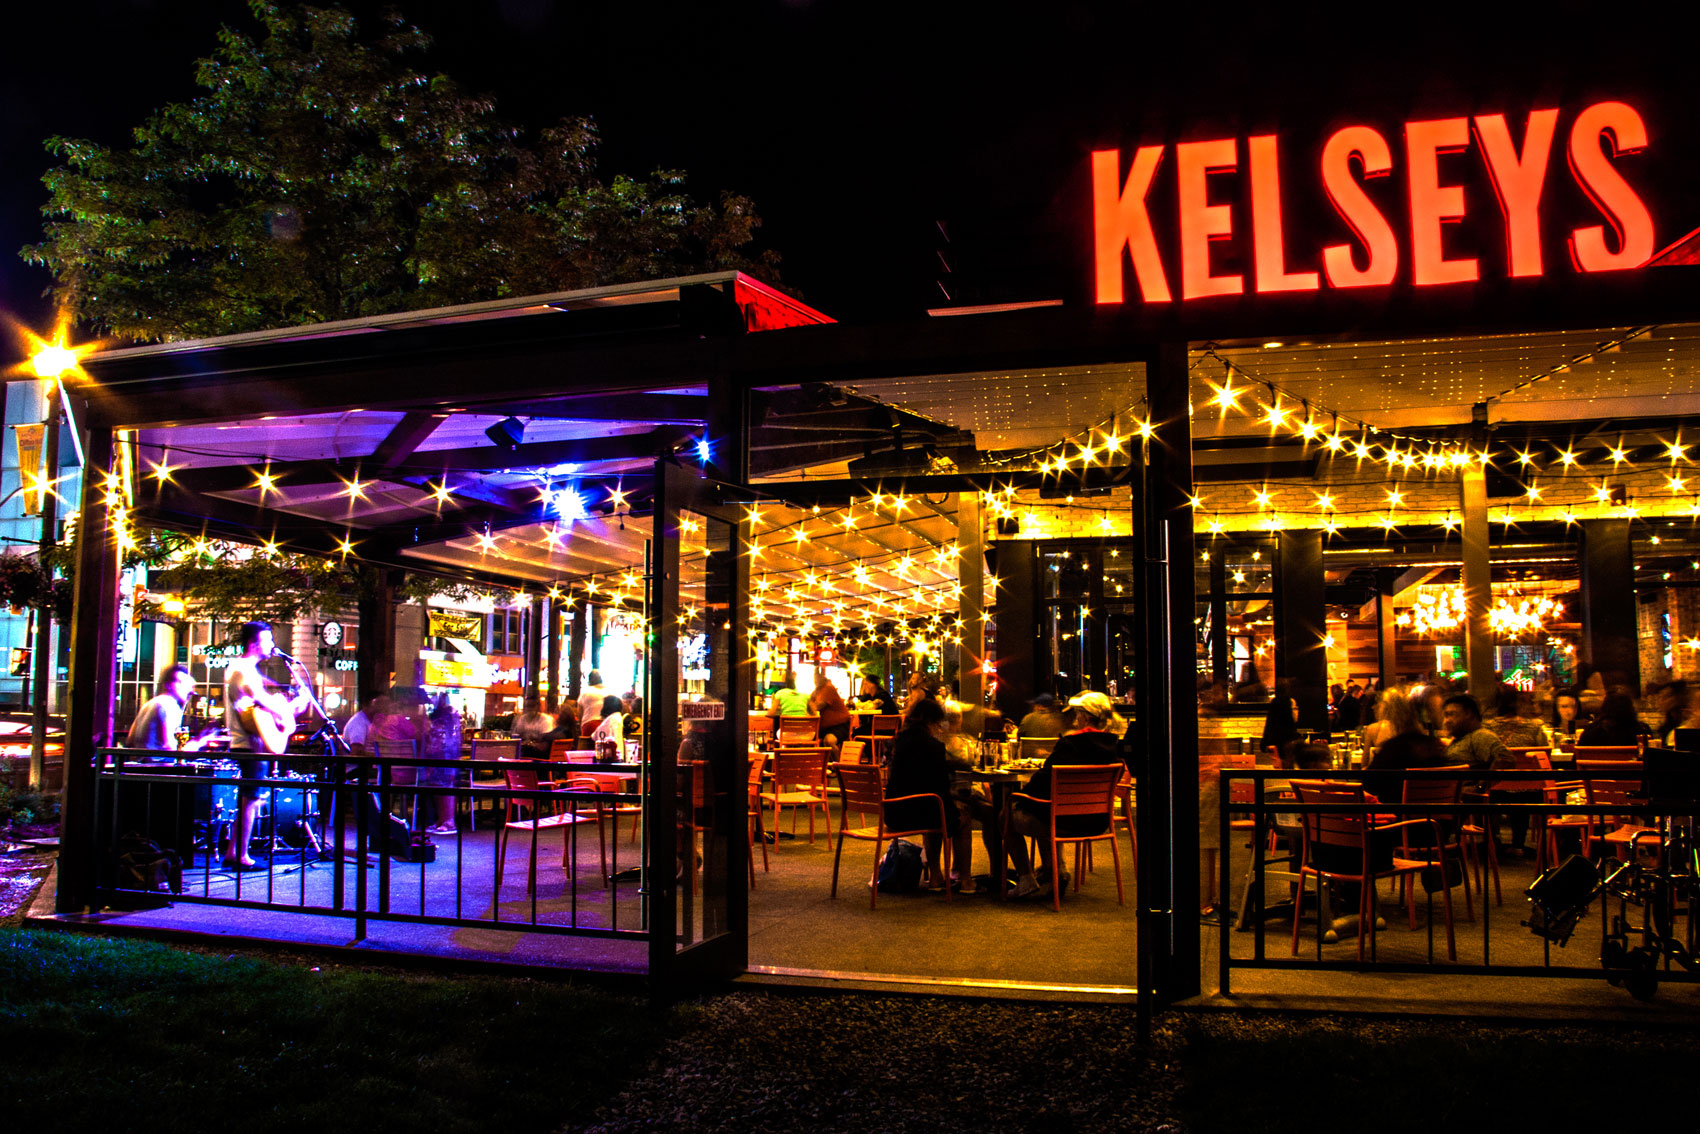 Kelsey's Patio At Night busy with diners